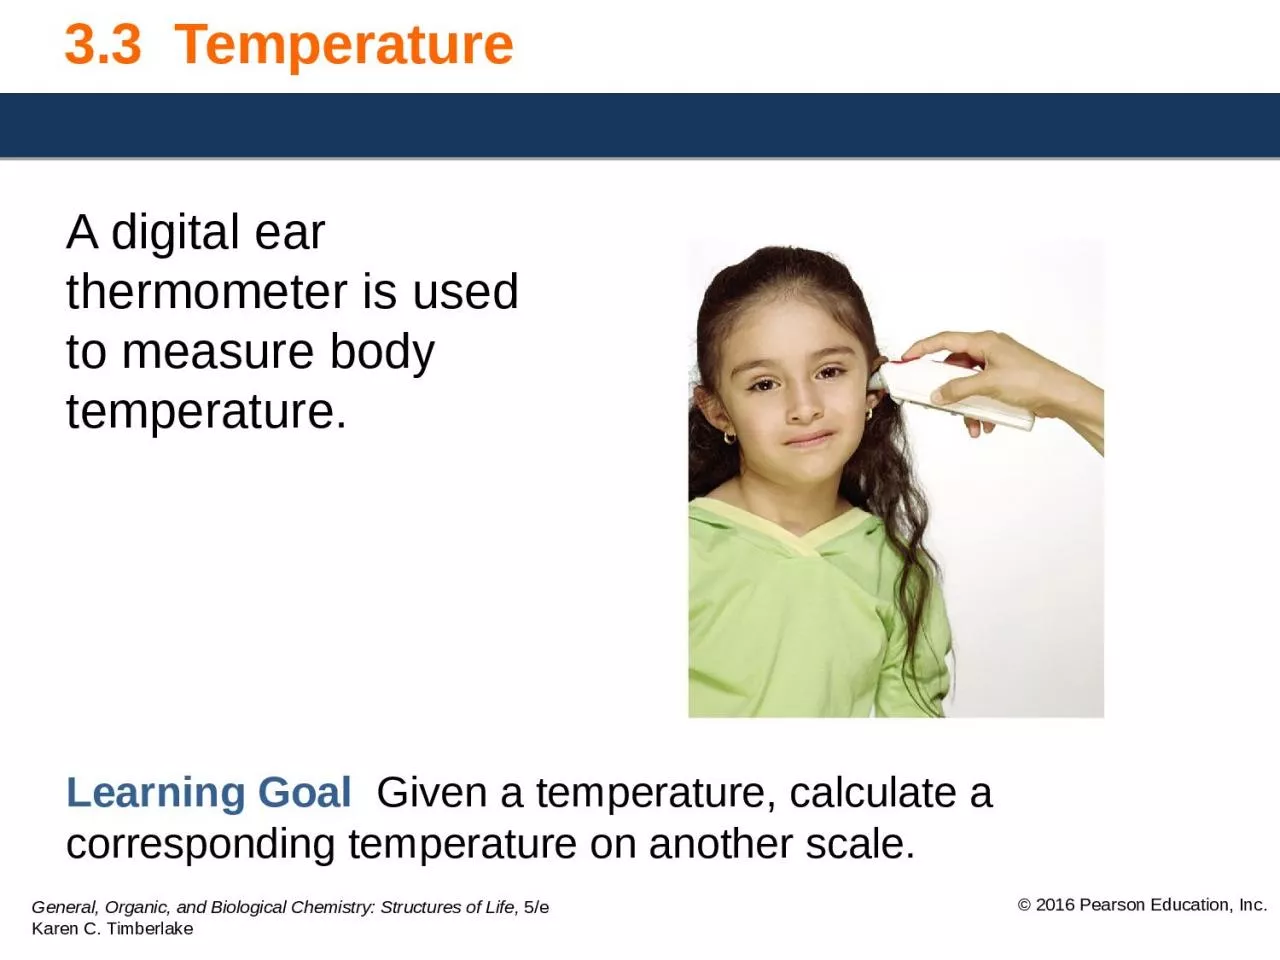 A digital ear thermometer is used to measure body temperature.